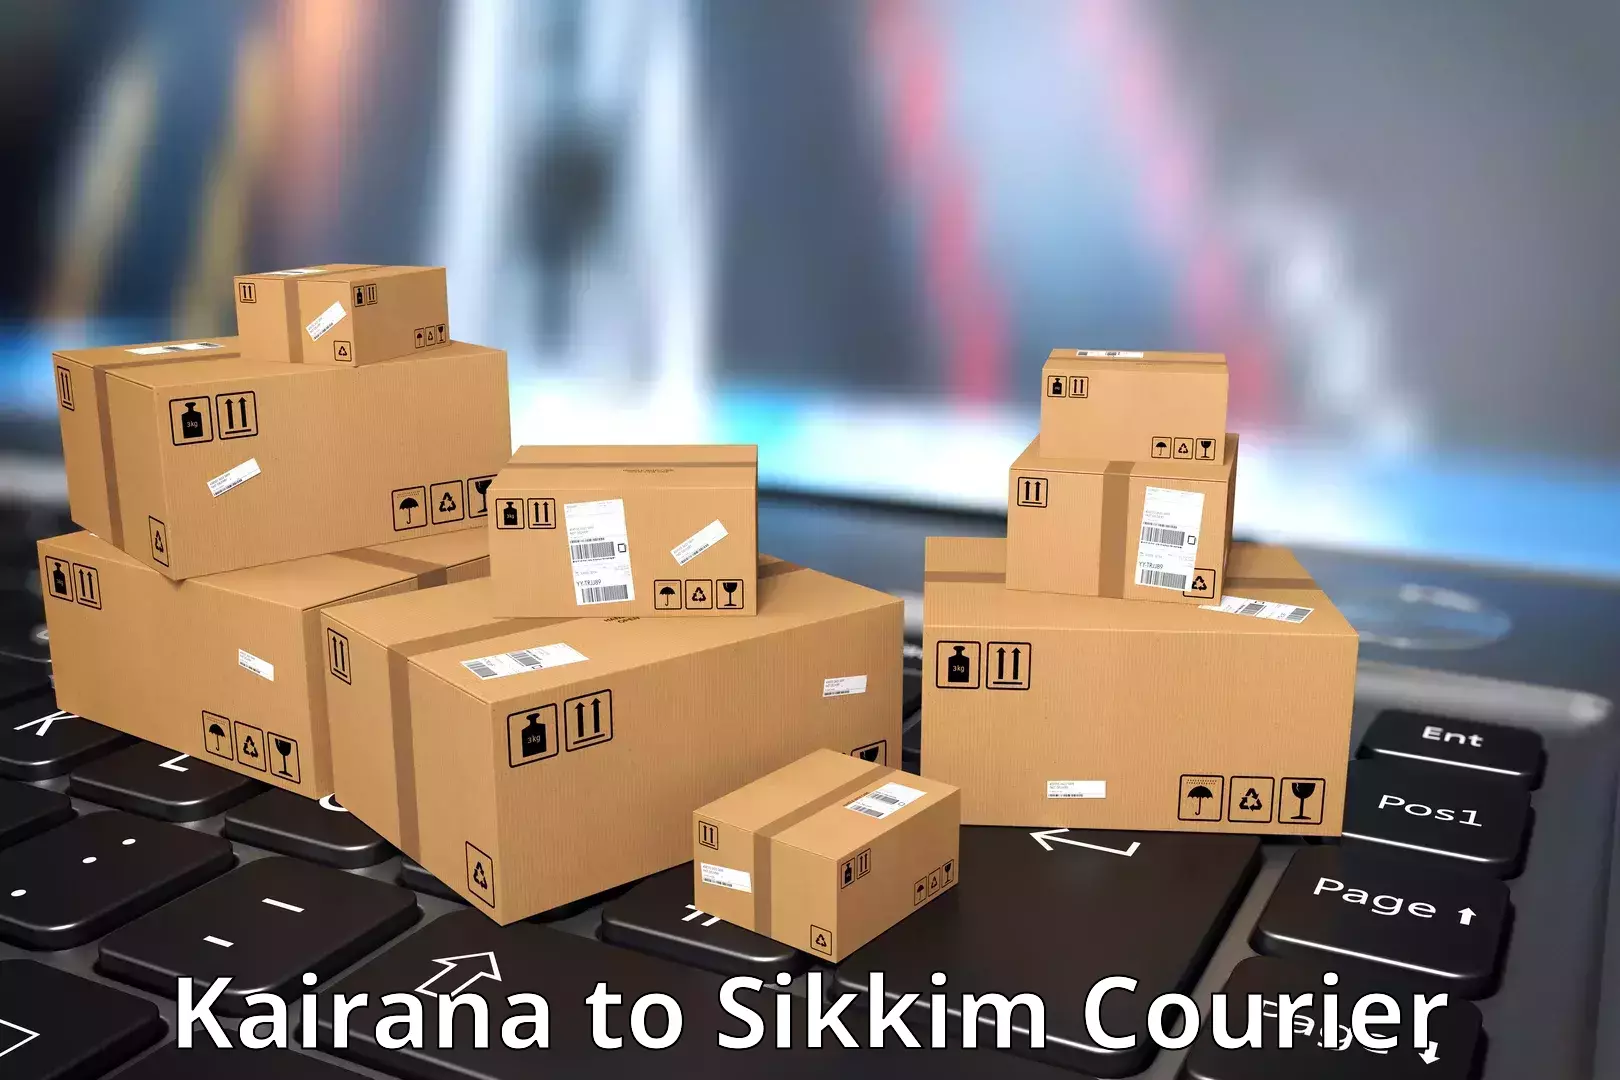 Express delivery network Kairana to Sikkim